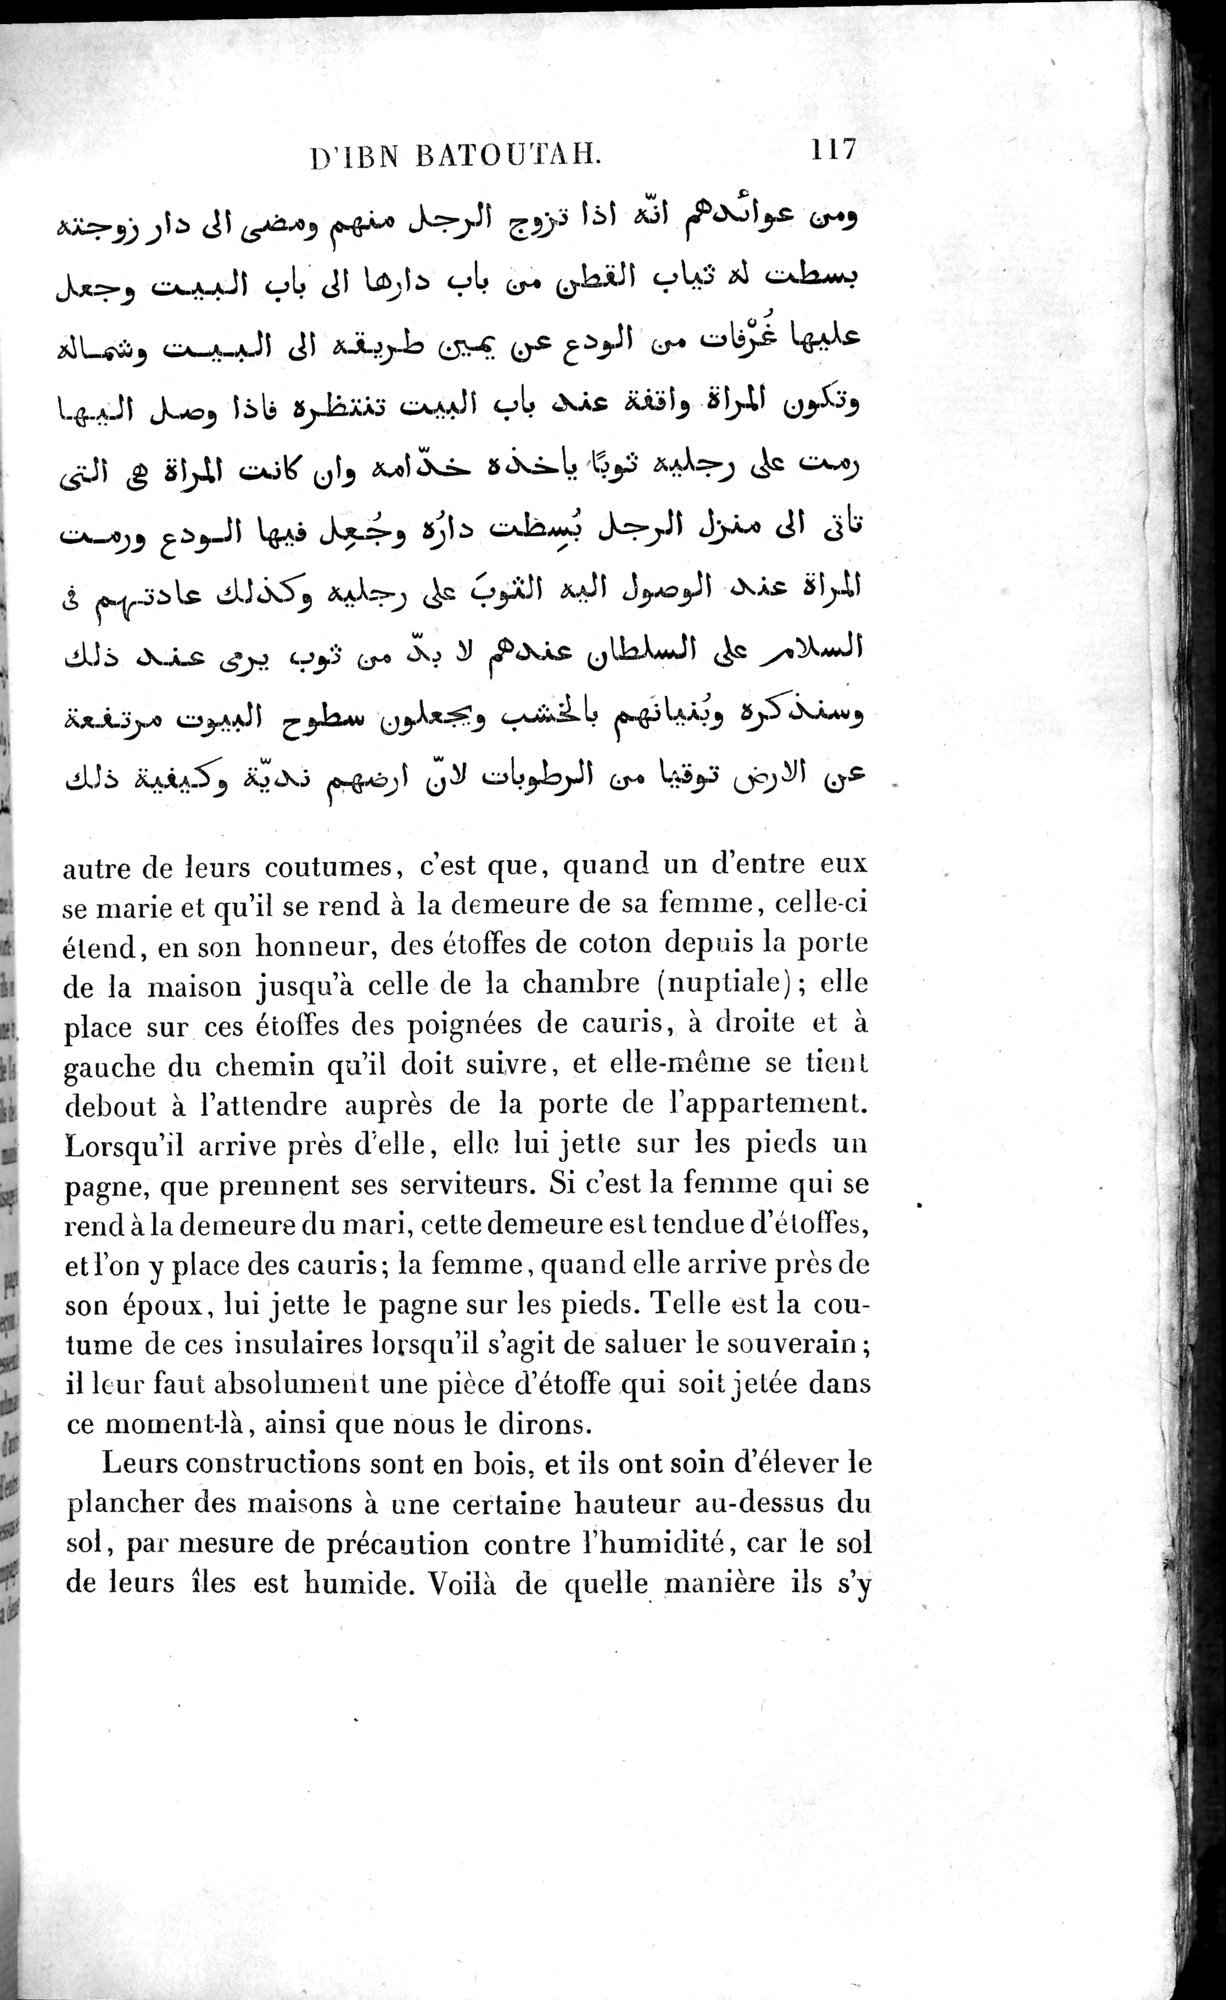 Voyages d'Ibn Batoutah : vol.4 / Page 129 (Grayscale High Resolution Image)